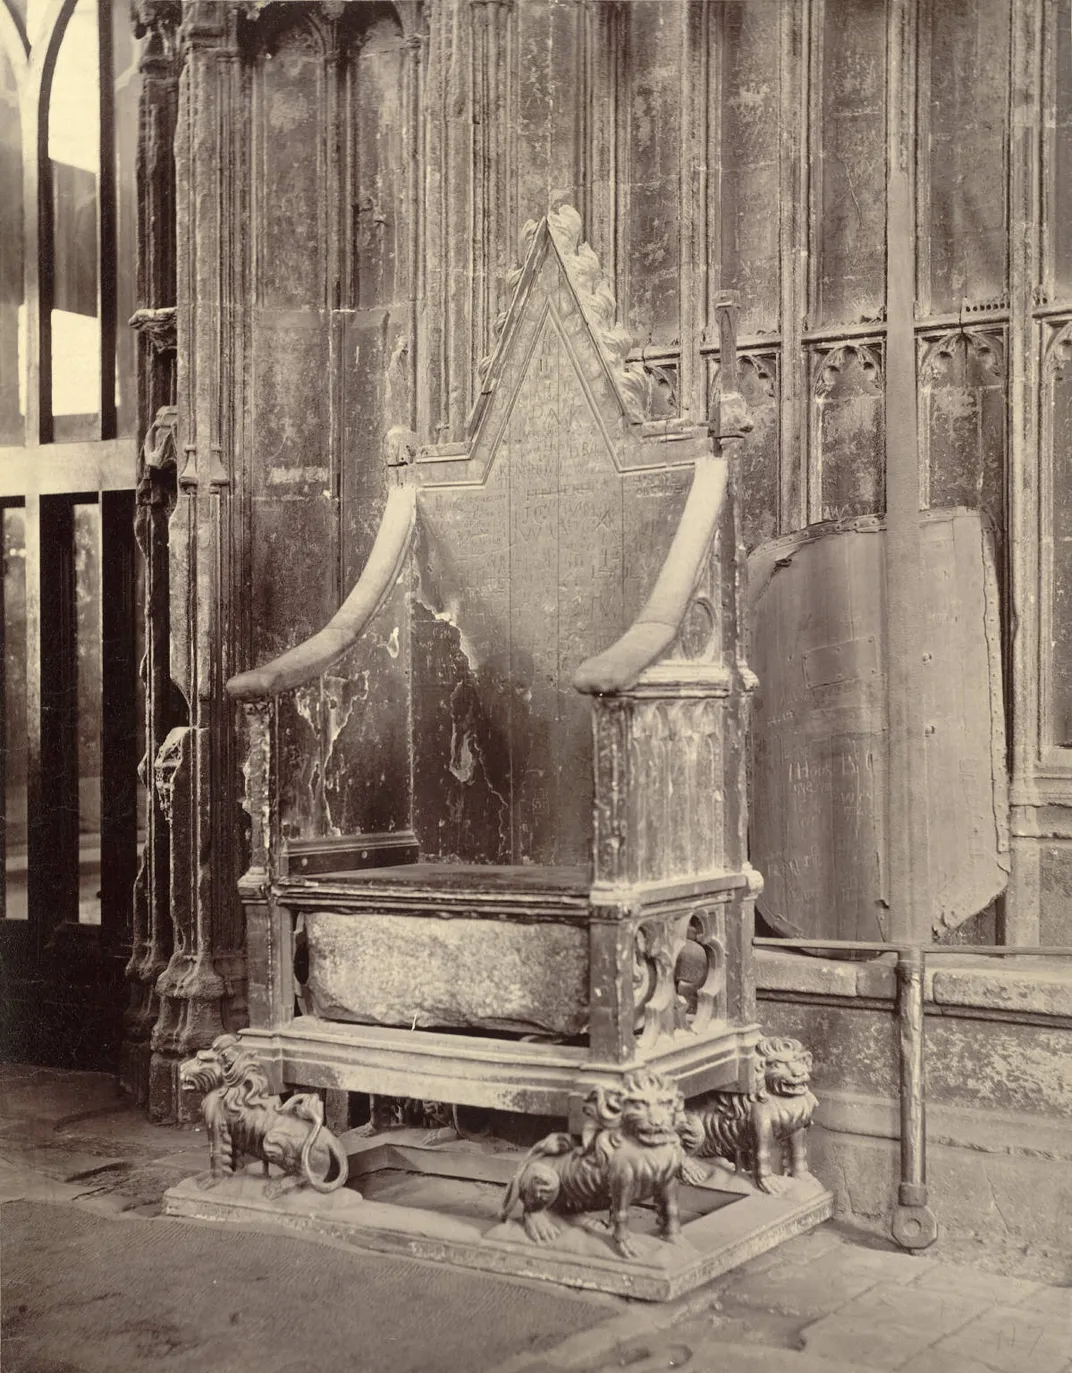 A late 19th-century photograph of the Coronation Chair, with the Stone of Scone visible below the seat